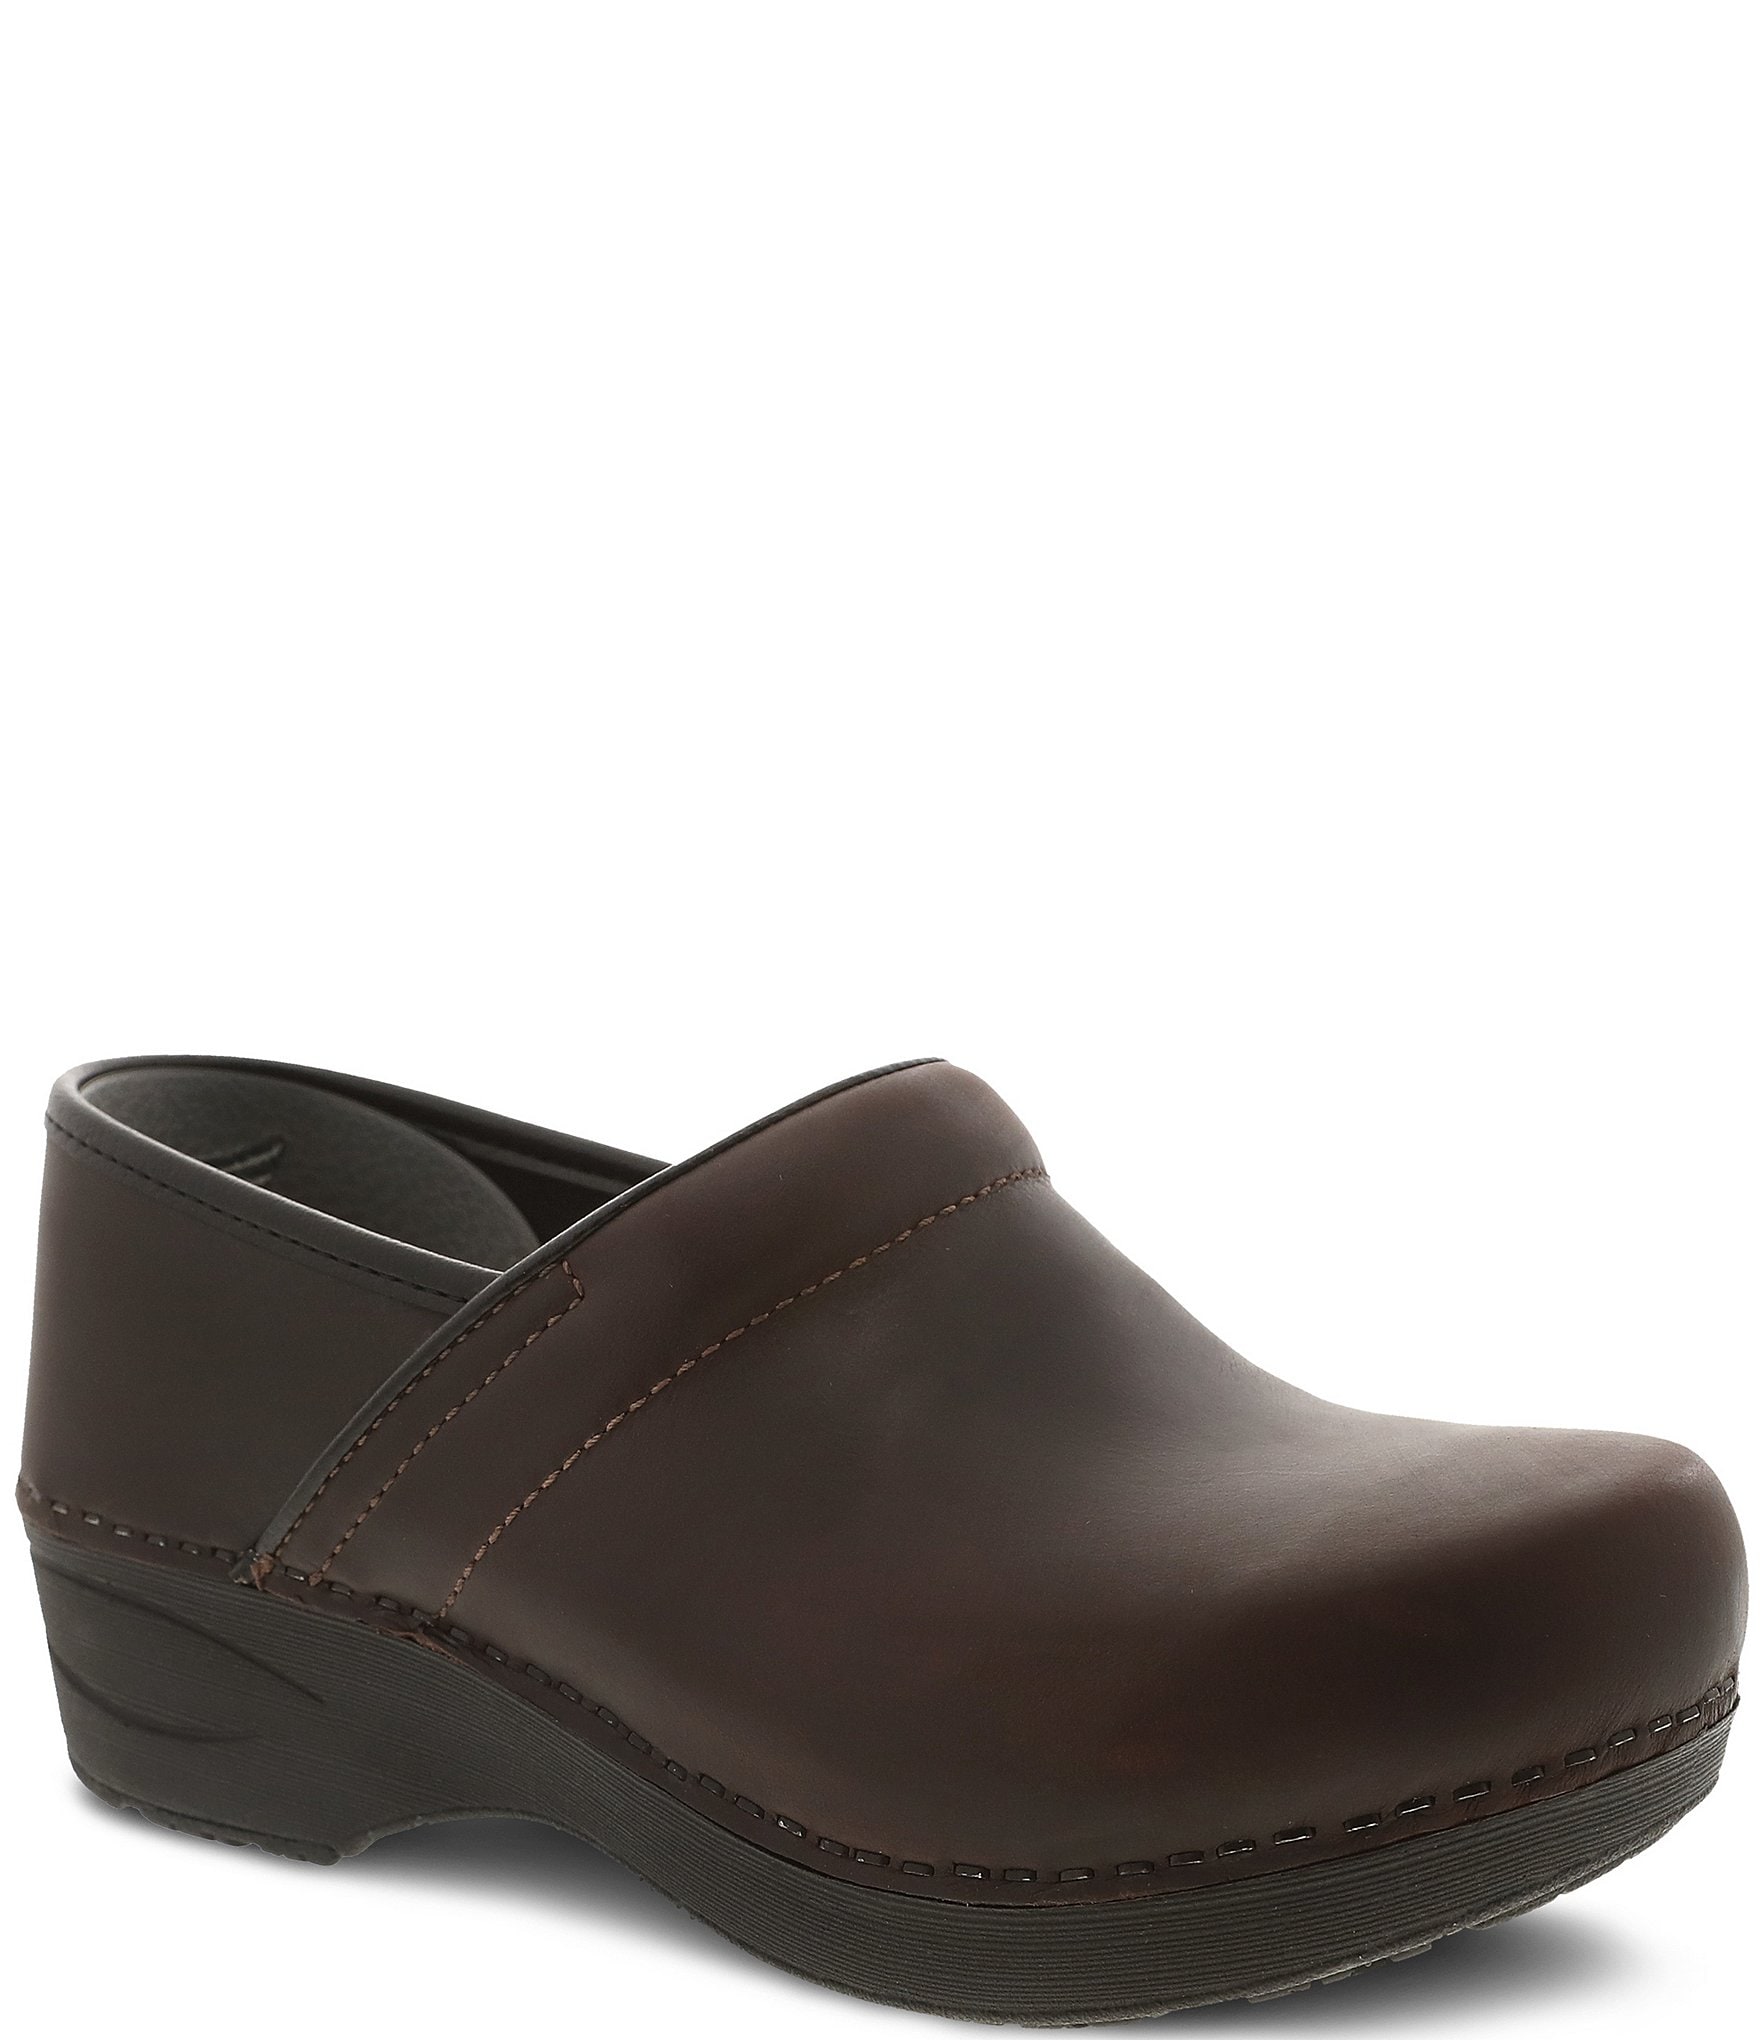 brown clog shoes